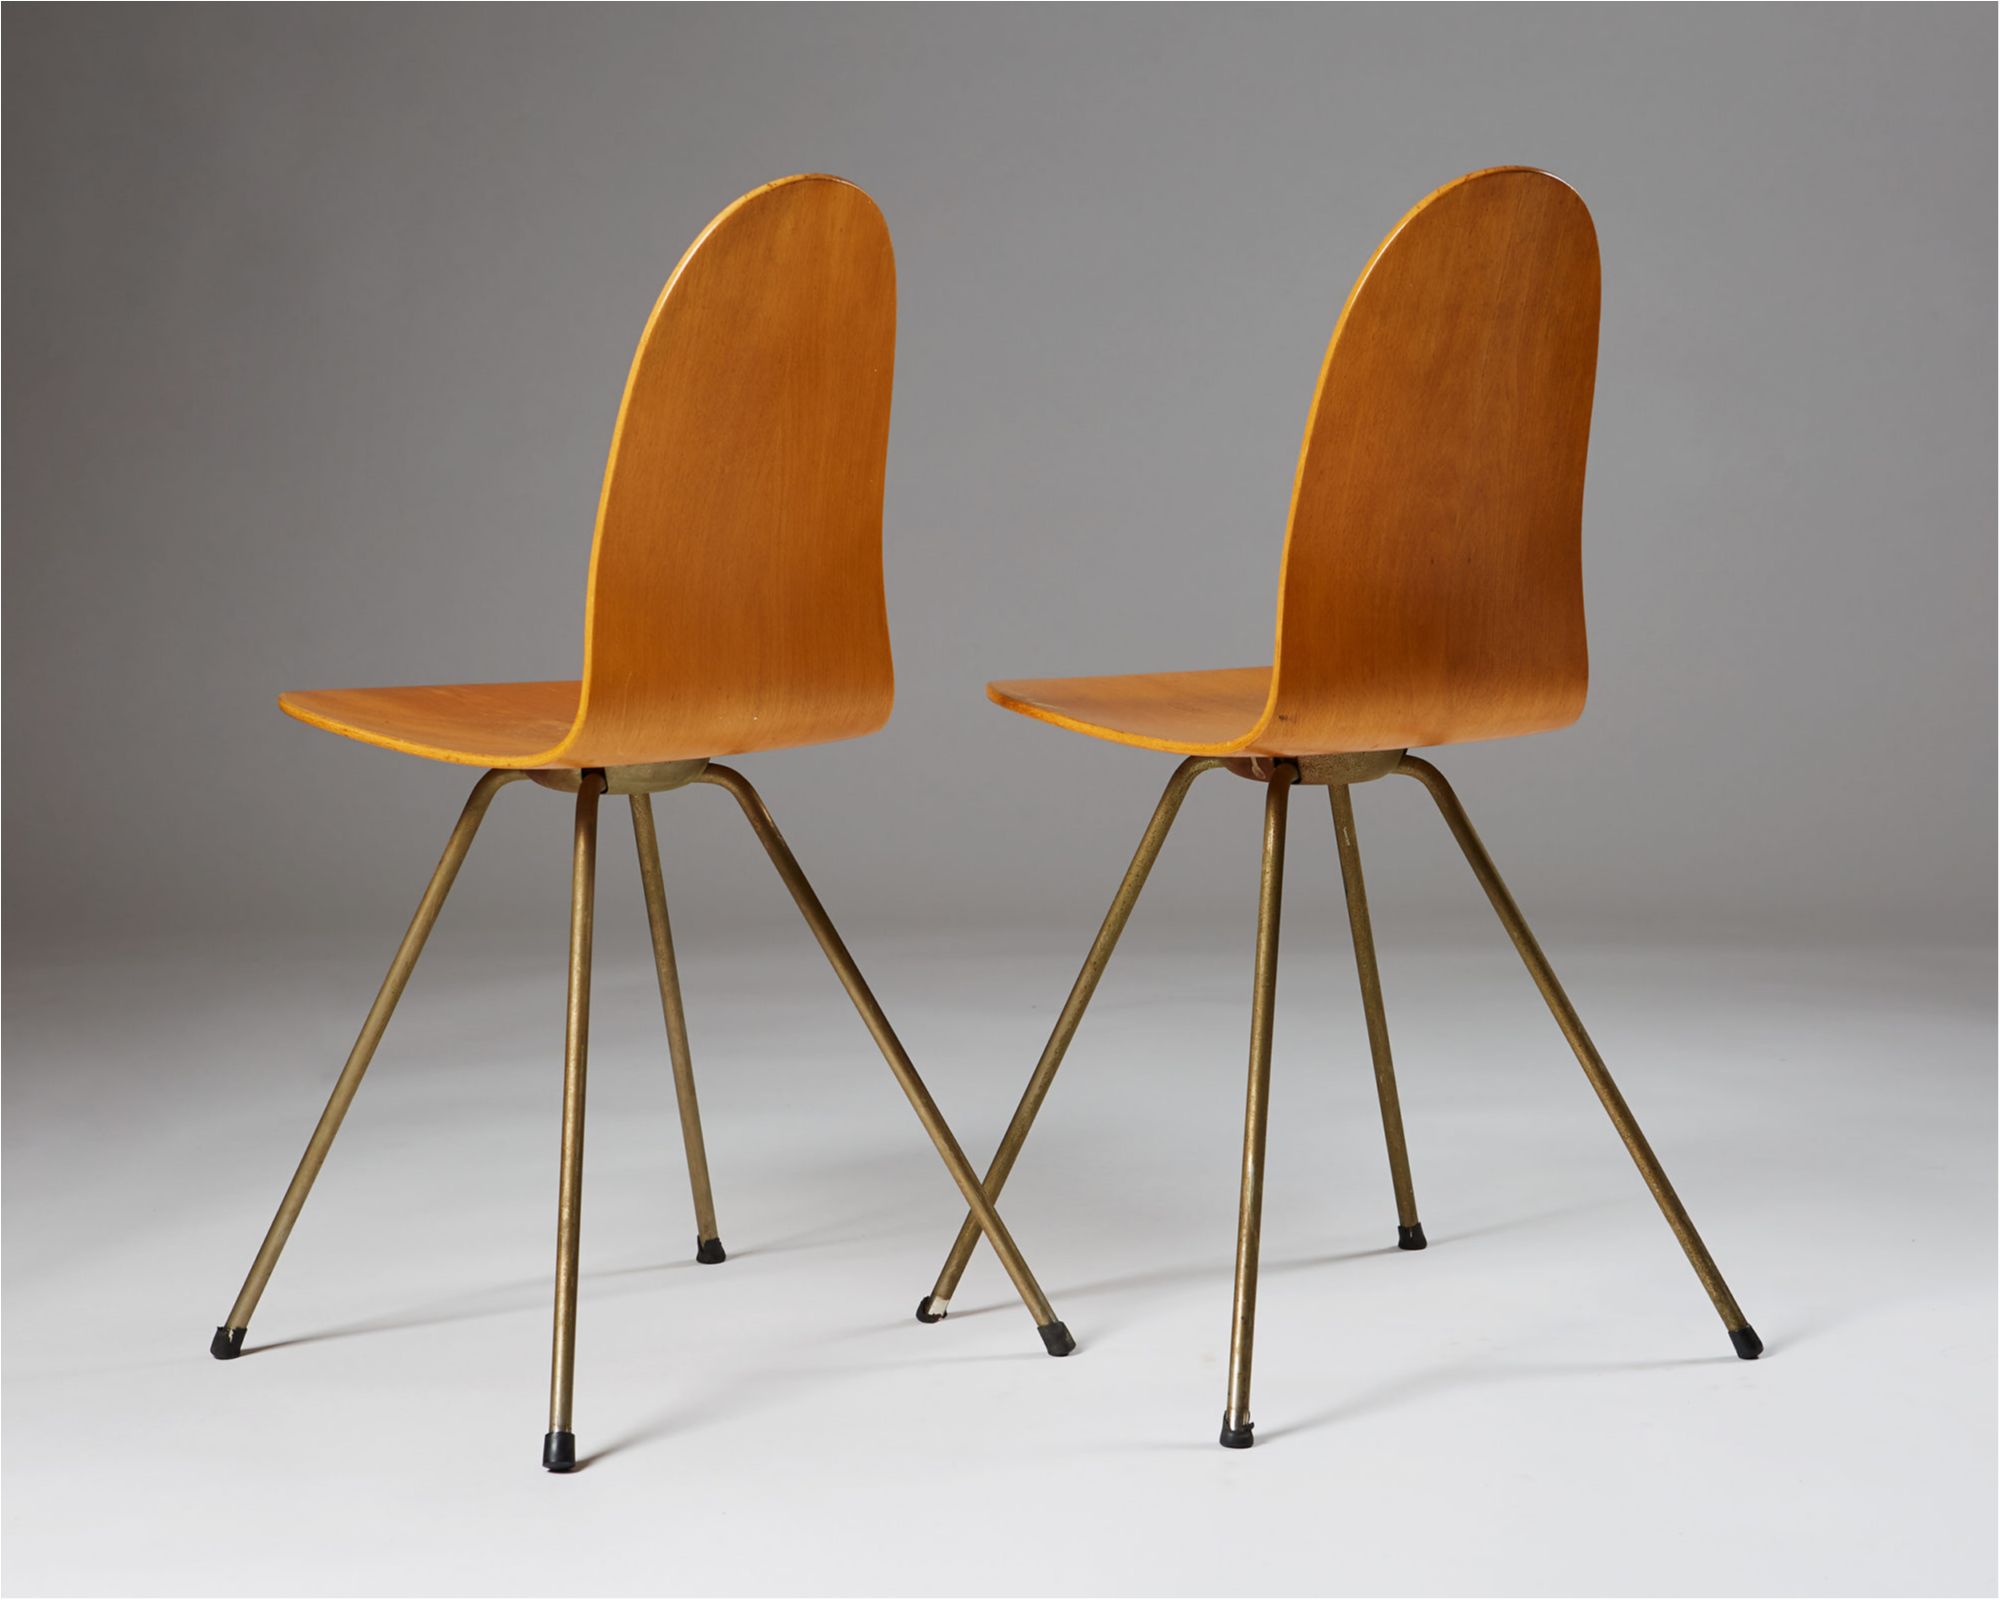 Chairs The Tongue by Arne Jacobsen Denmark 1955